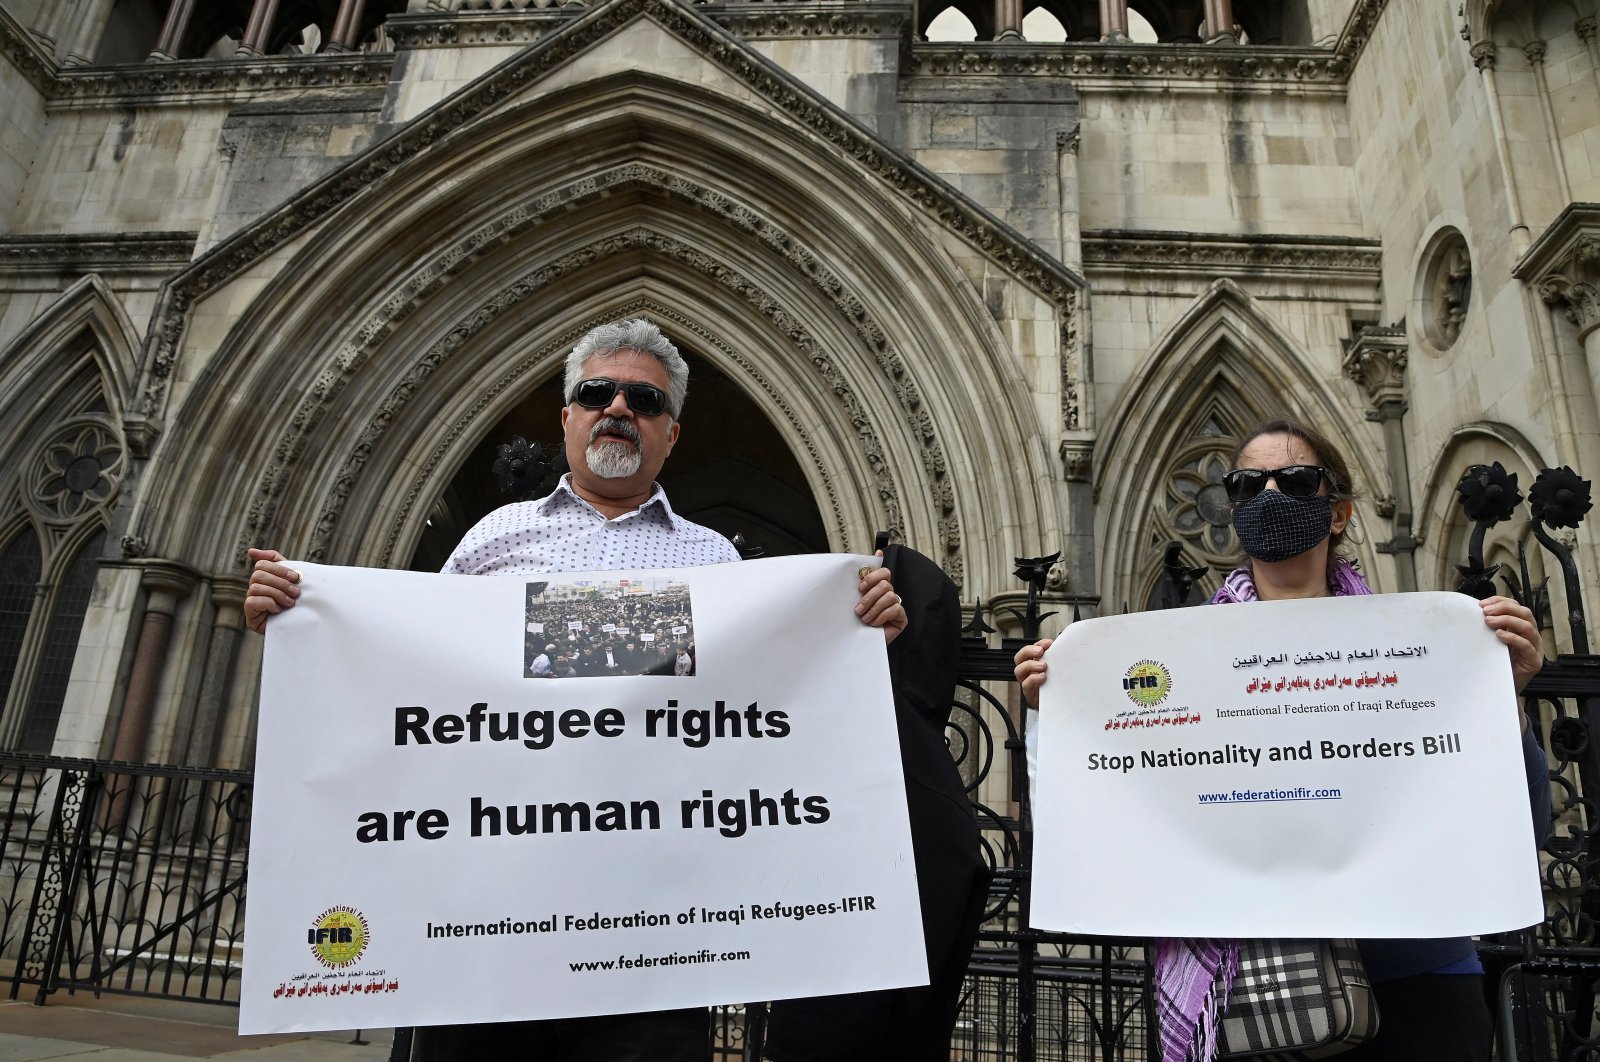 Demonstrators protest outside the Royal Courts of Justice whilst a legal case is heard over halting a planned deportation of asylum seekers from Britain to Rwanda, London, Britain, June 10, 2022. (Reuters Photo)